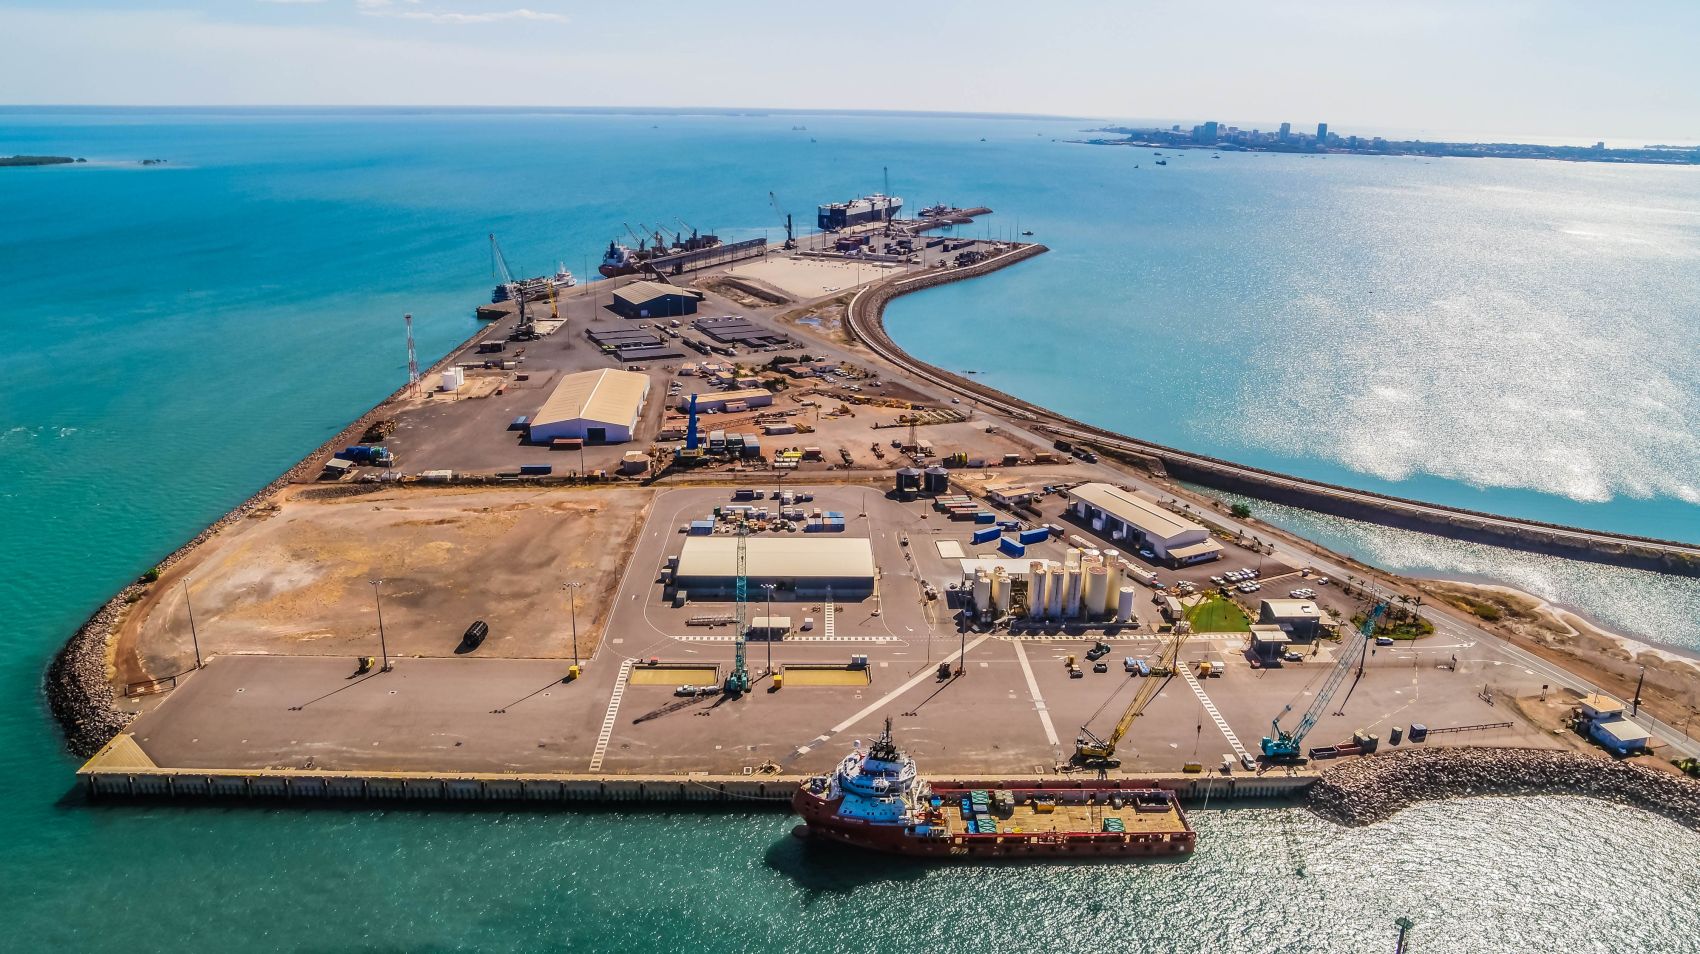 Concerns Raised As Australian Port Rolls Out Red Carpet for Chinese Investment